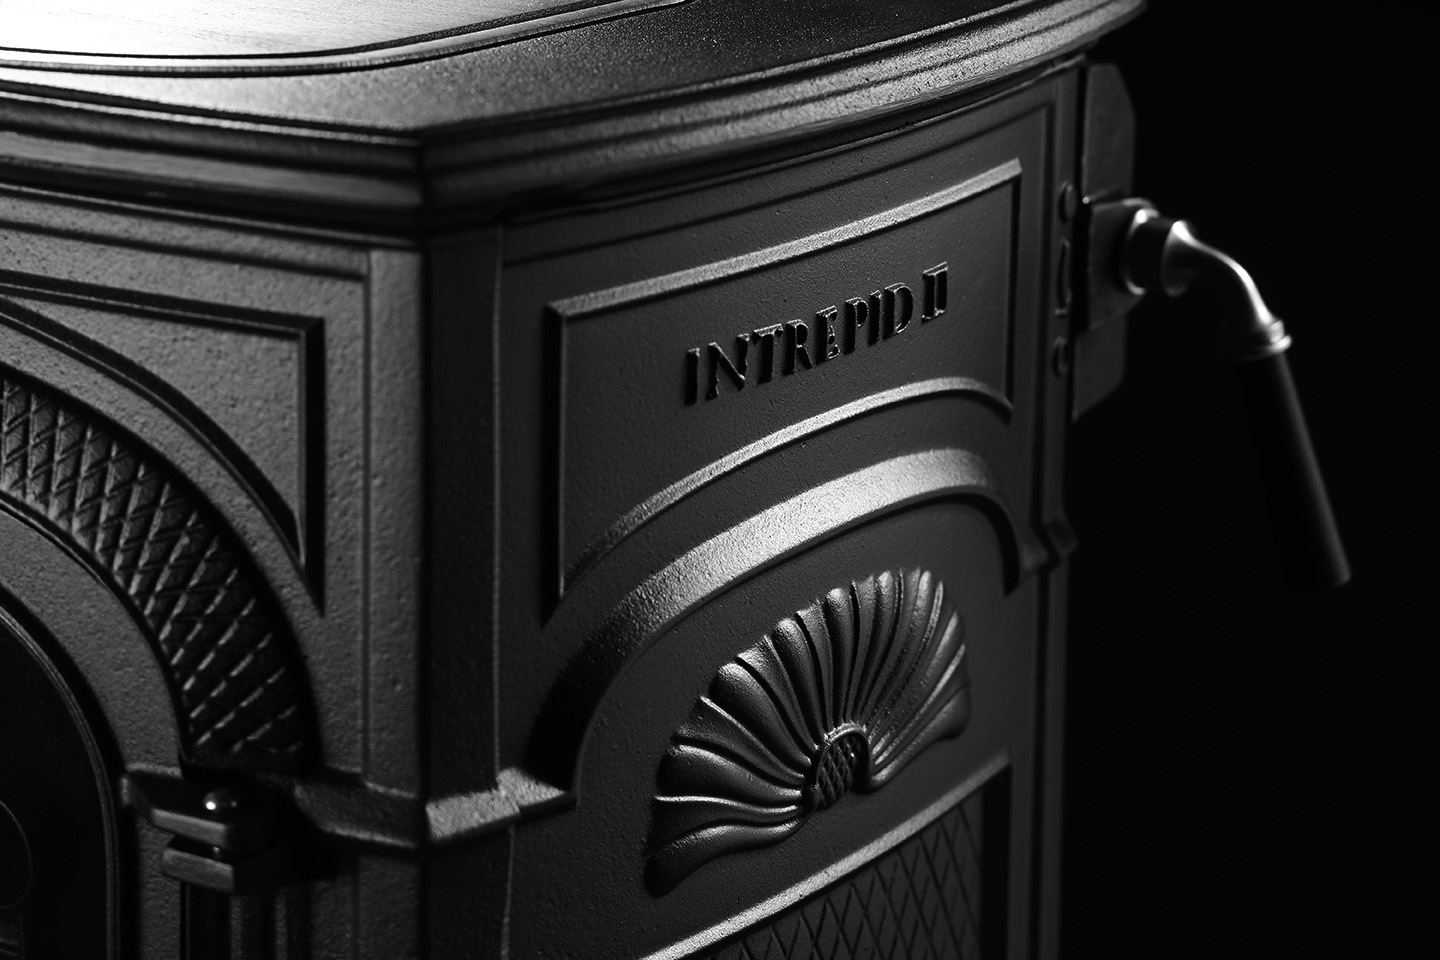 Intrepid II Wood Stove – Photo (Detail 2 – BW Low Res)